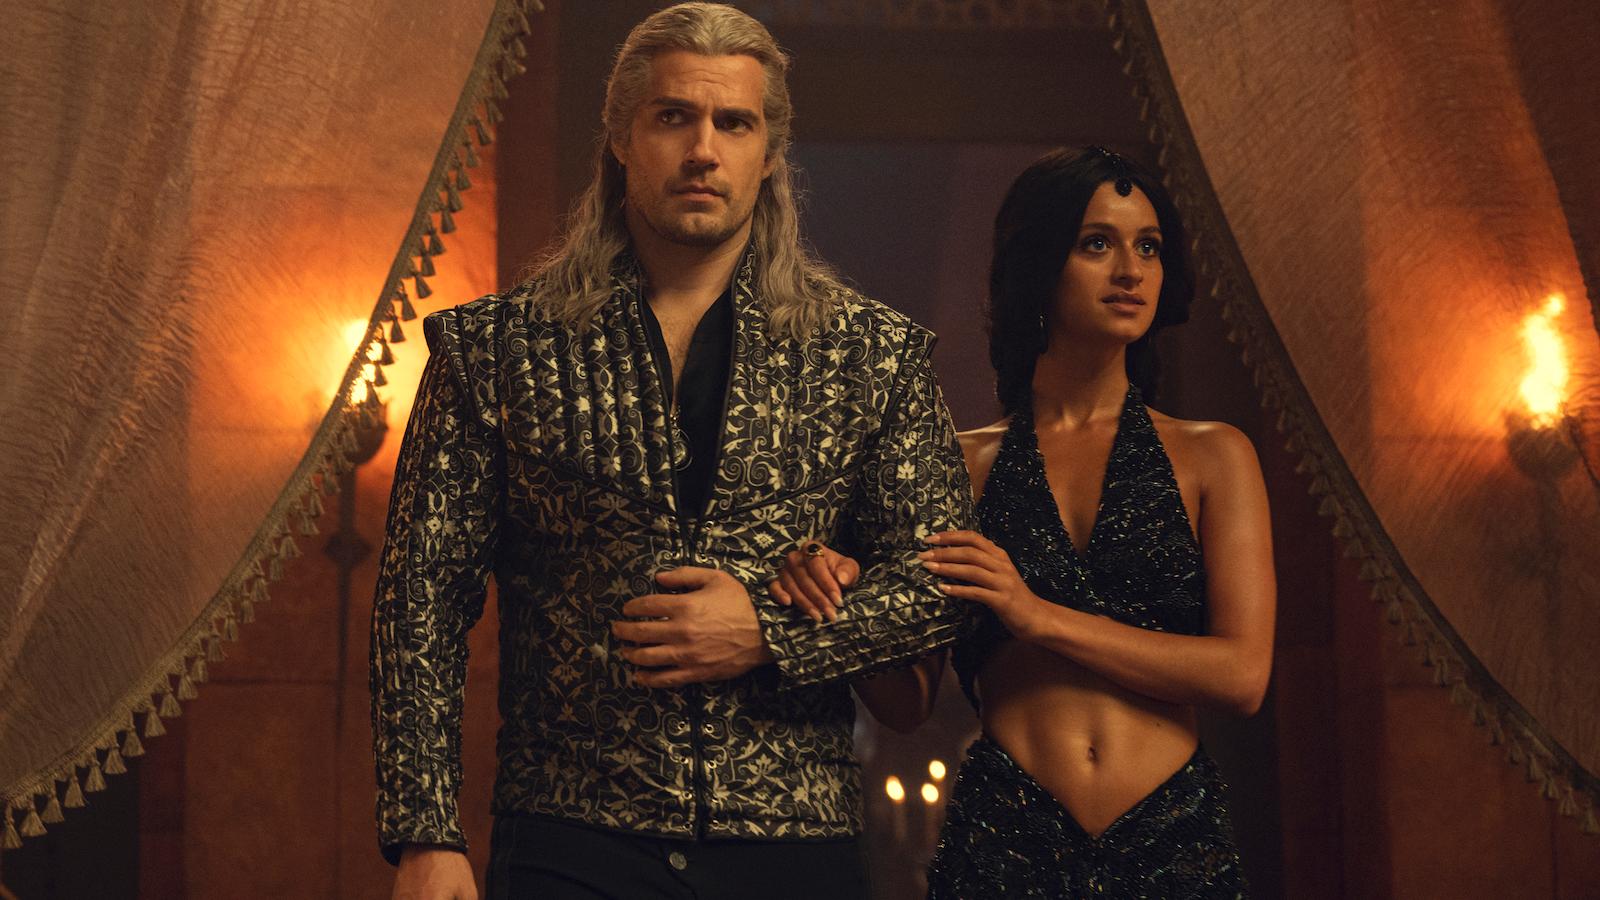 Henry Cavill as Geralt and Anya Chalotra as Yennefer in The Witcher Season 3